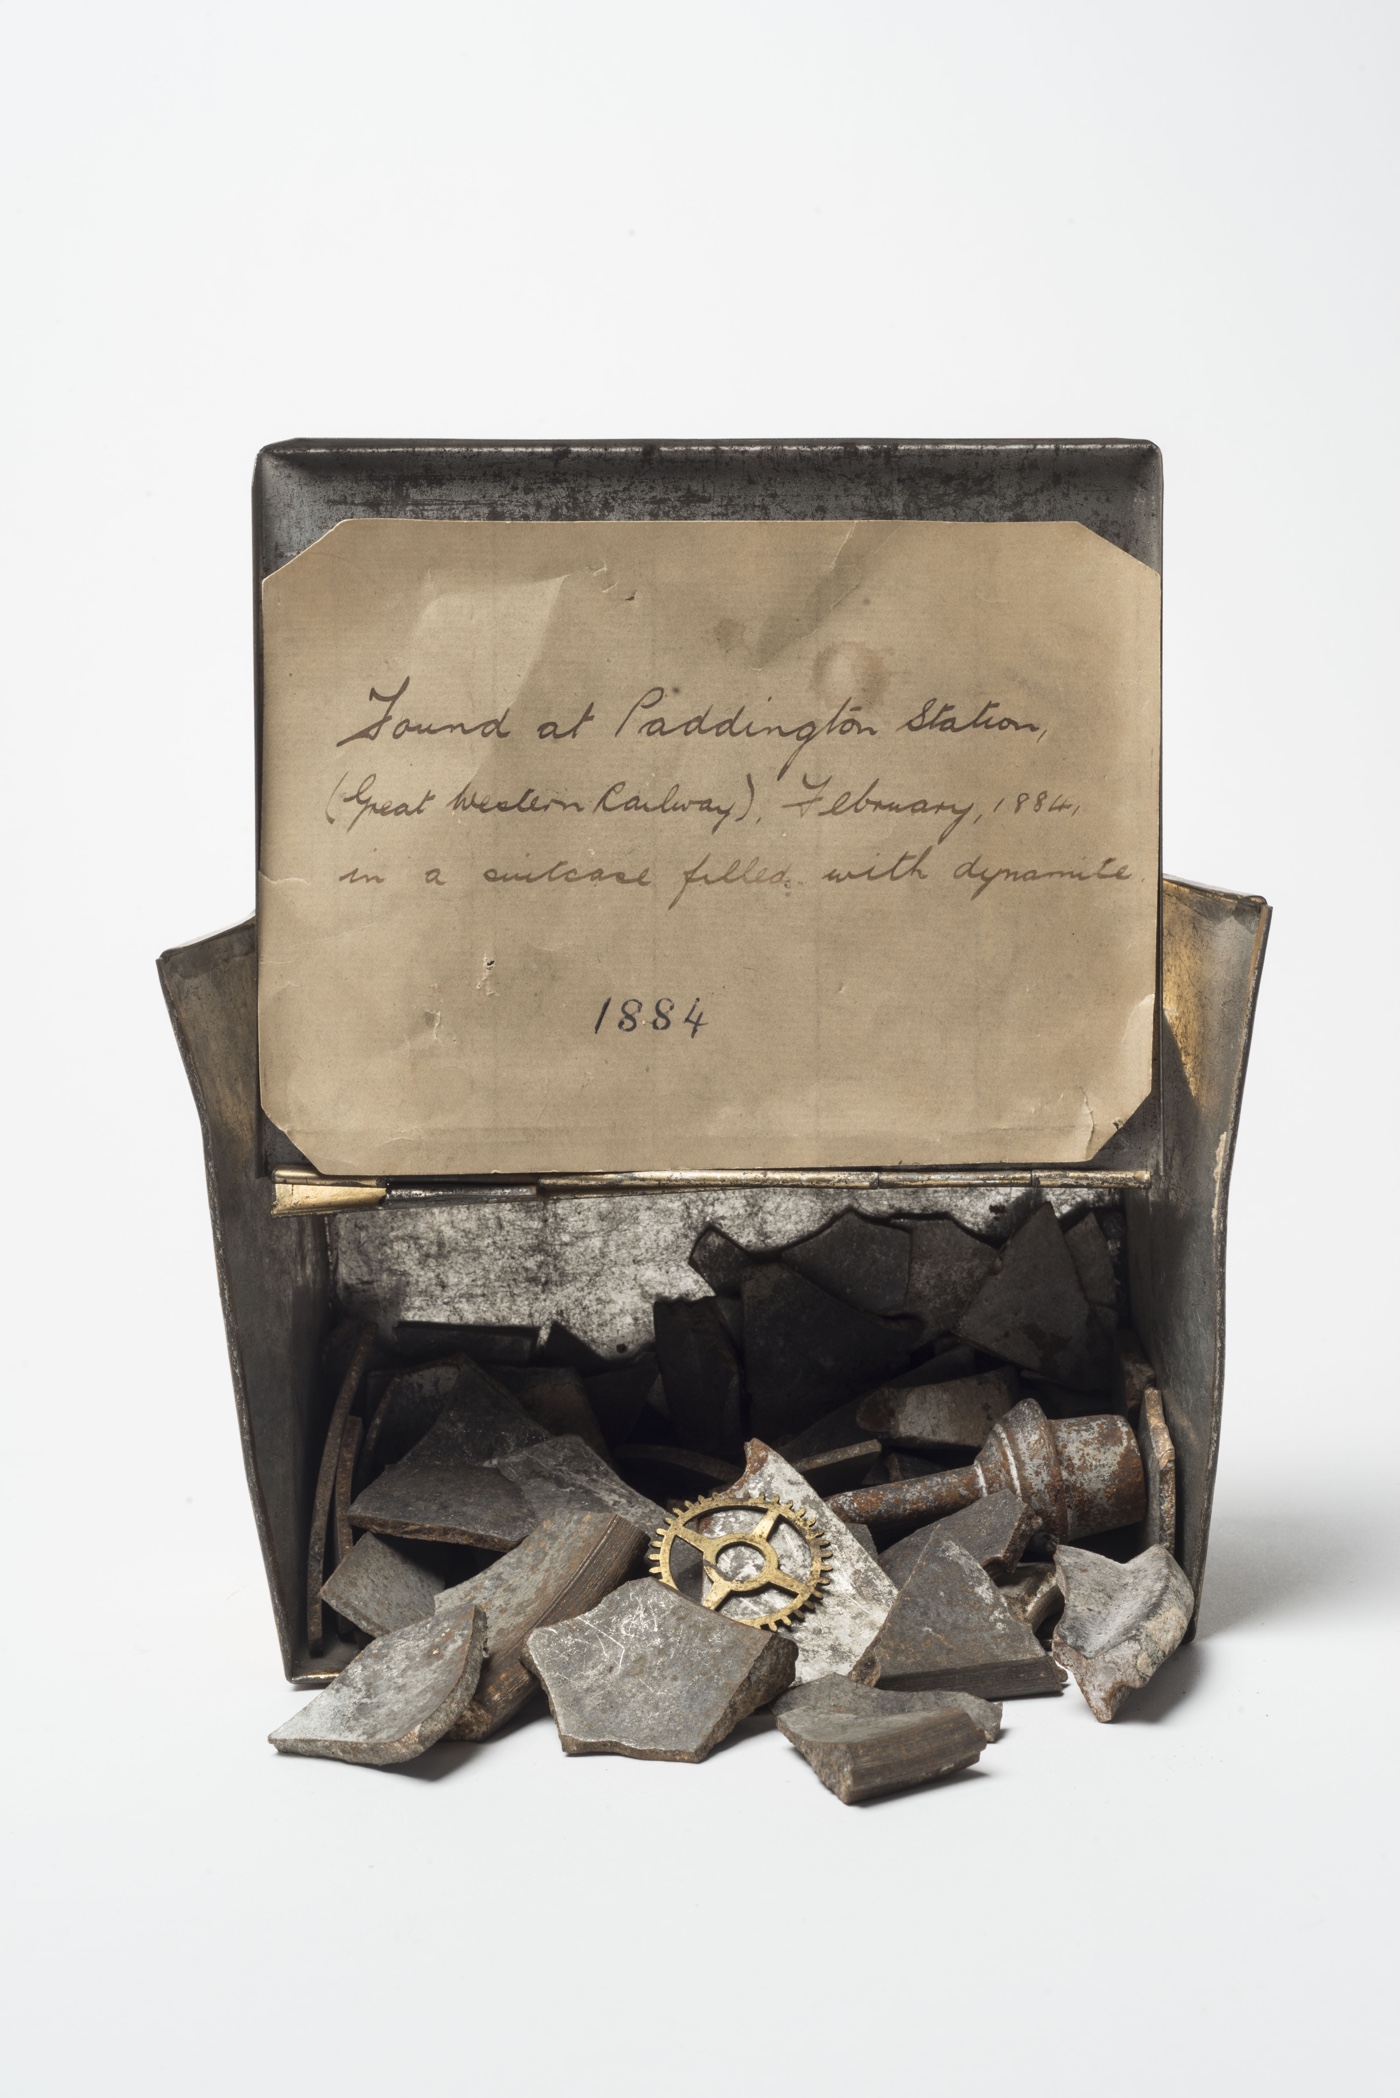 Terrorism: Shrapnel from an unexploded Fenian bomb found at Paddington Station 1884 © Museum of London